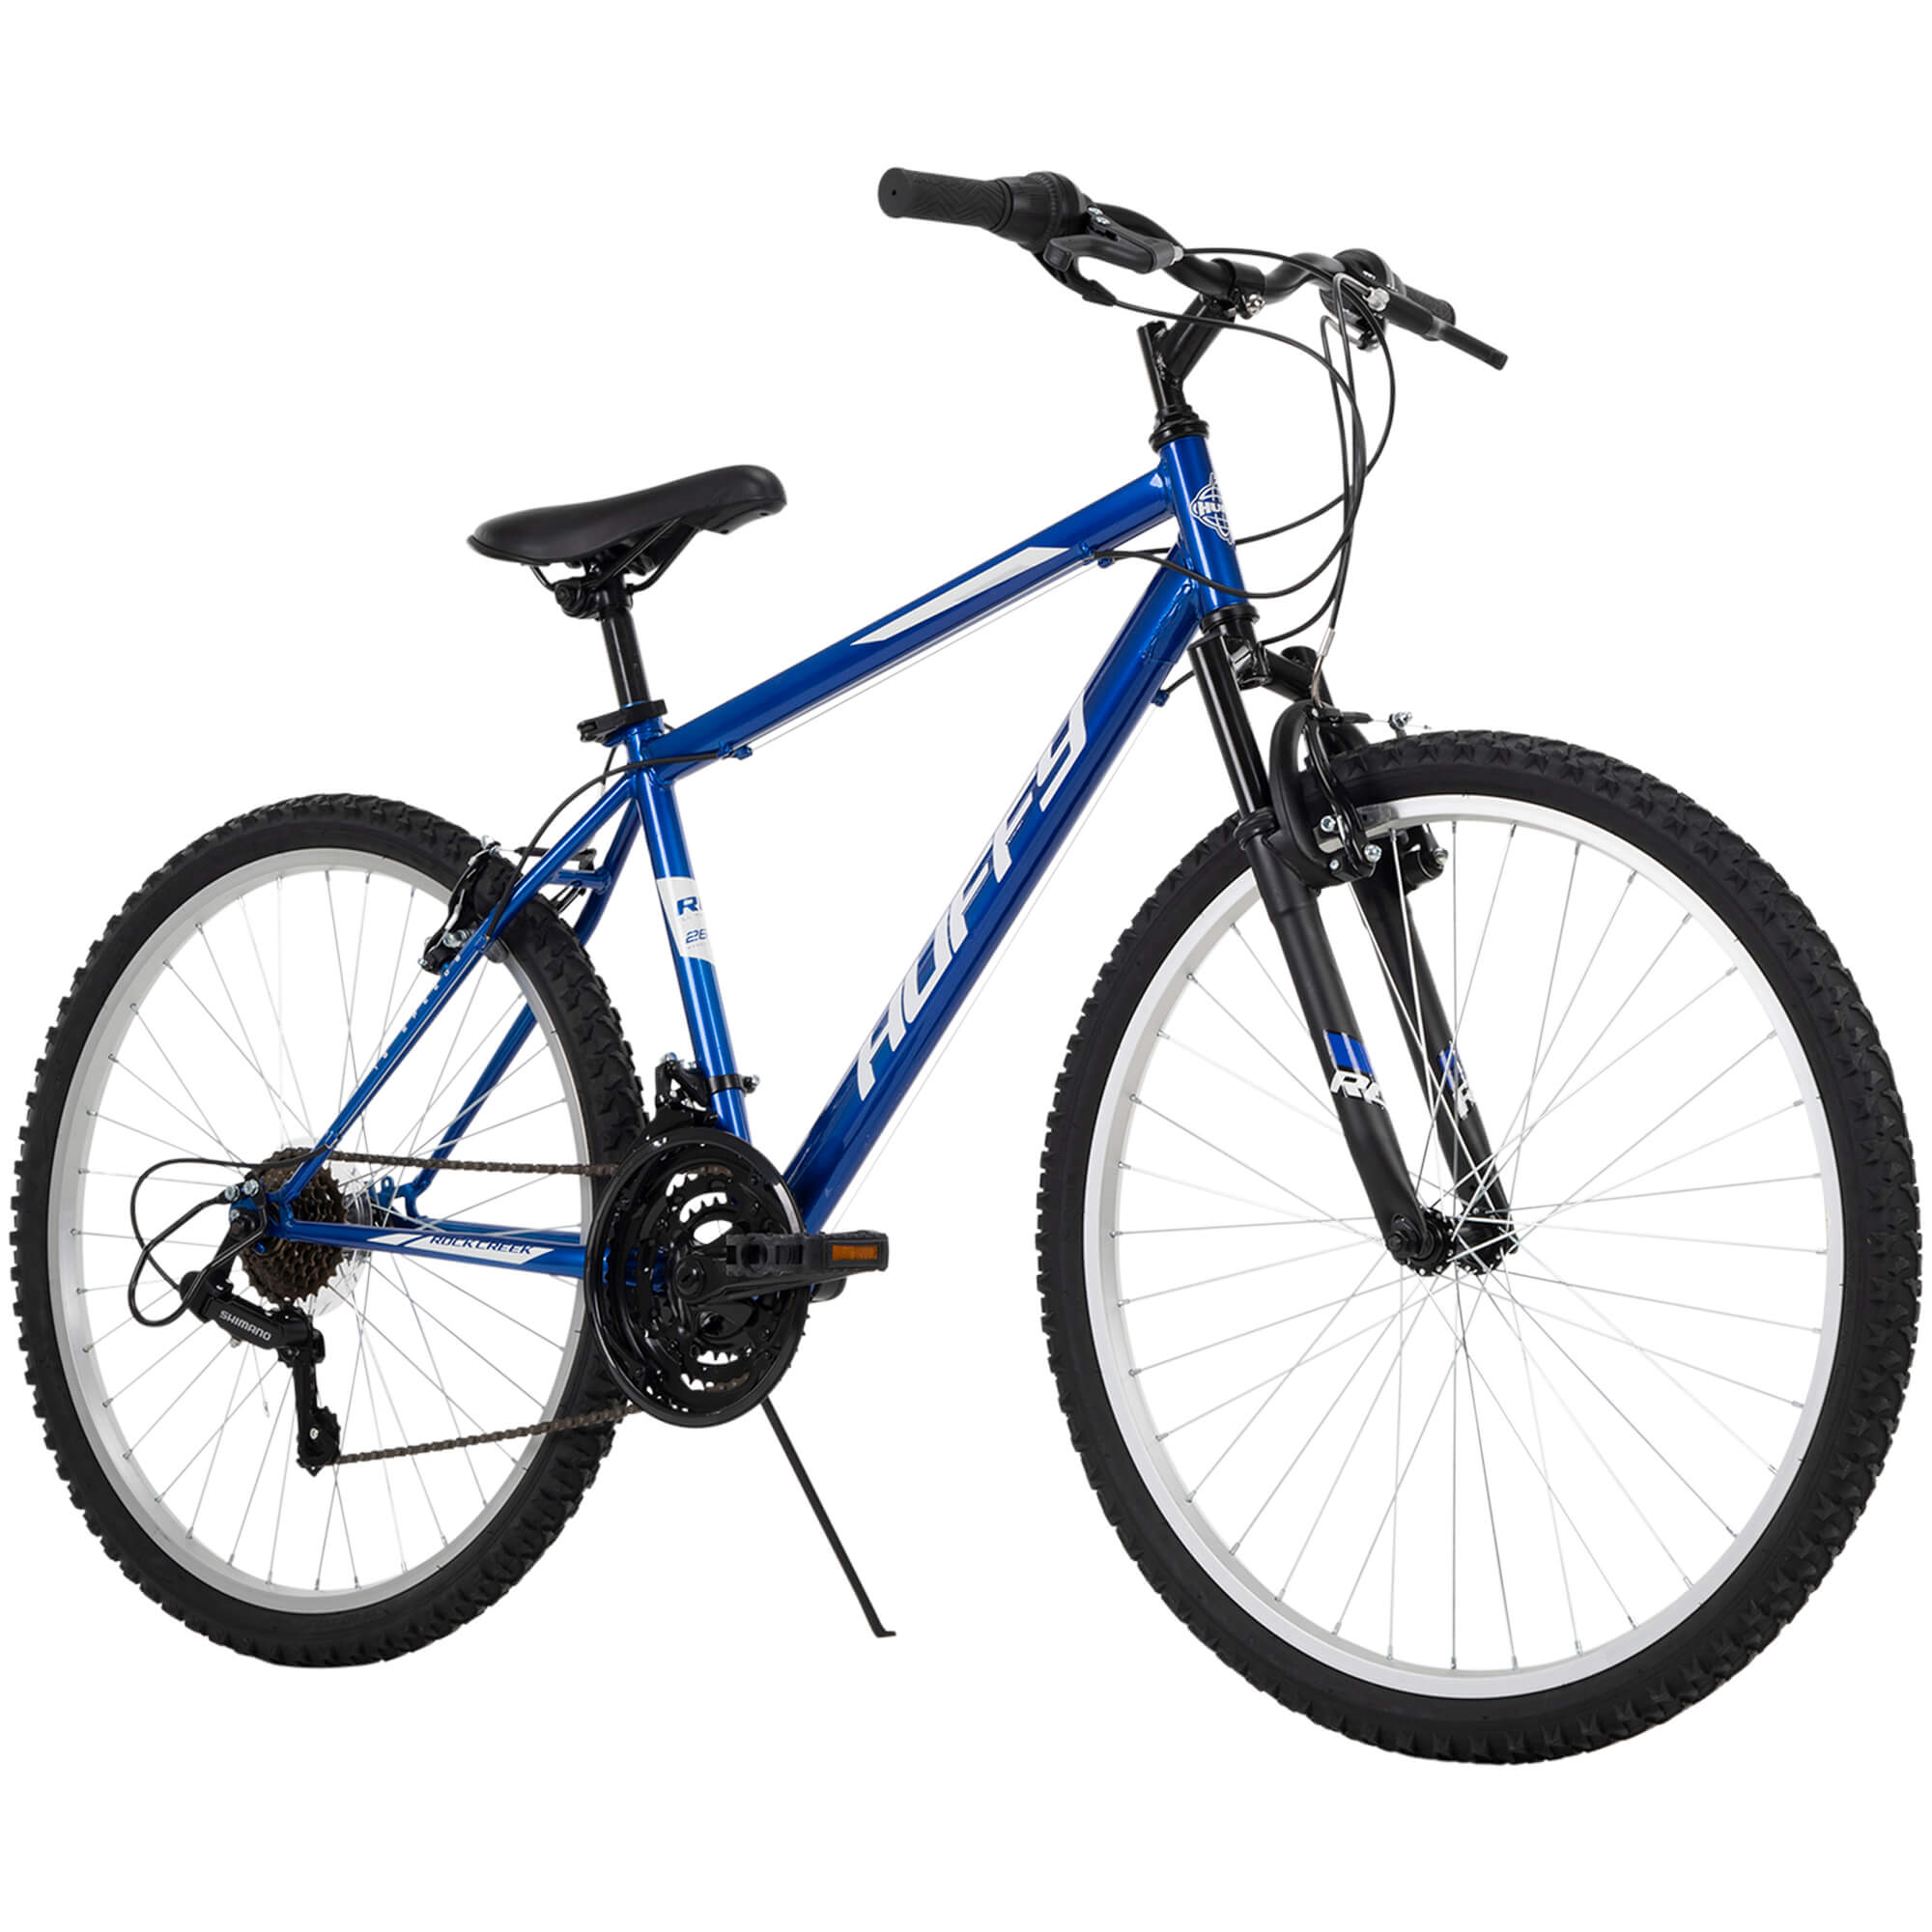 Huffy 26-inch Rock Creek Men's Mountain Bike, Ages 13 and Up, Blue - image 3 of 13